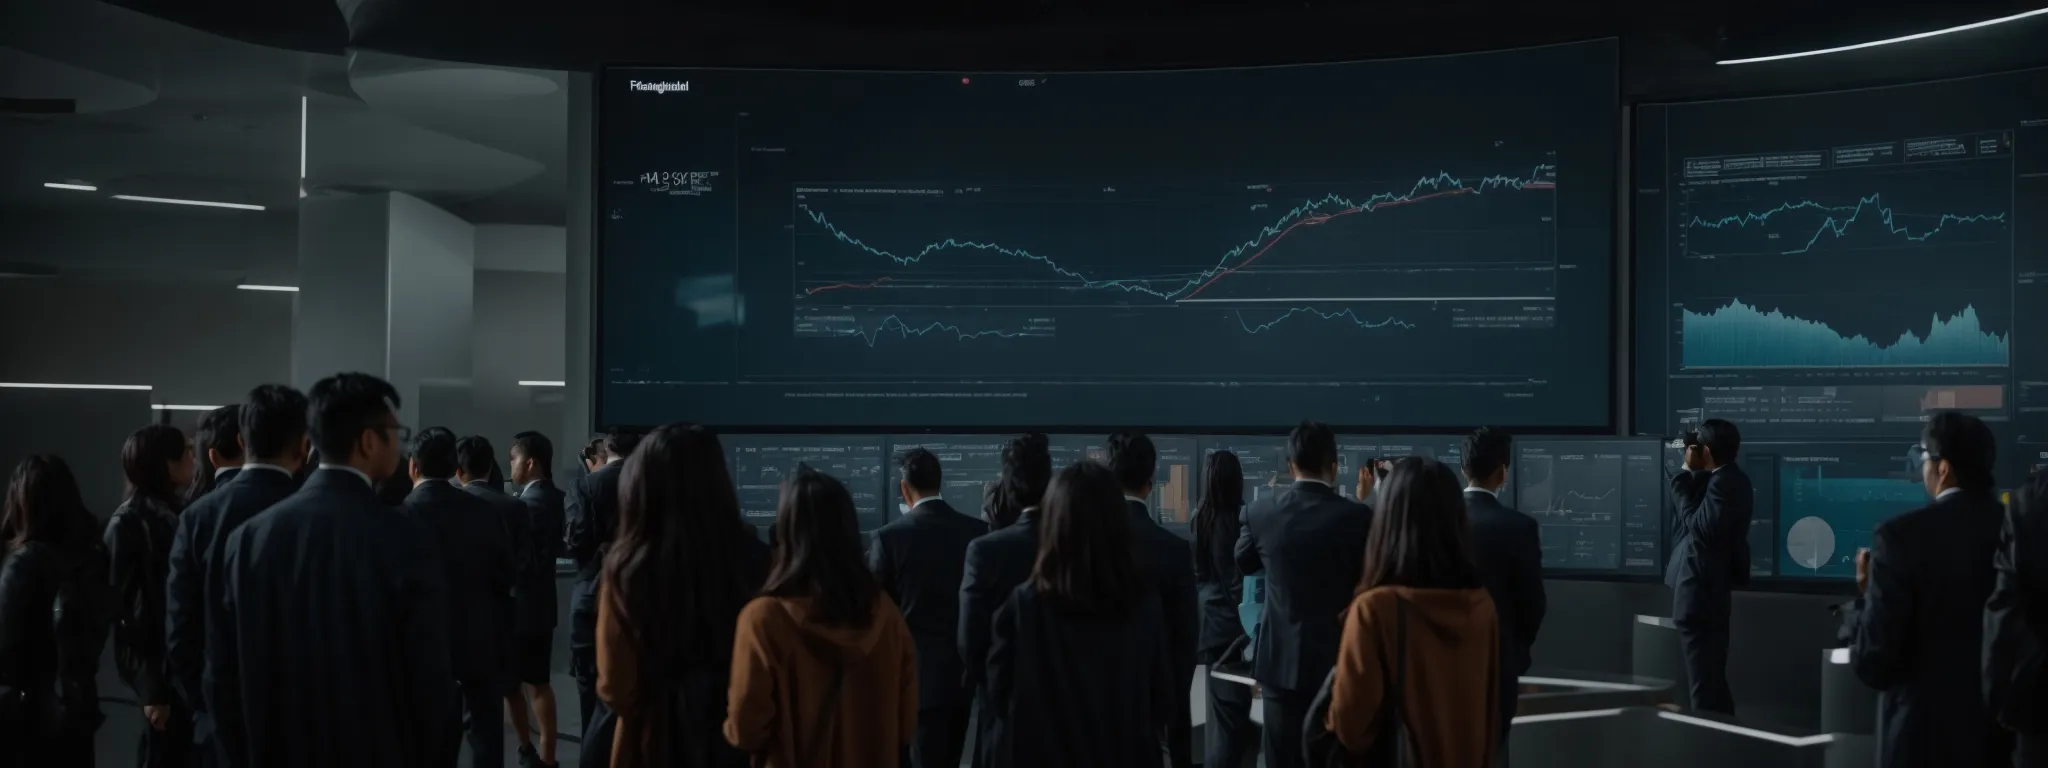 a diverse group of people collectively looking at a large digital screen displaying a trending analytics dashboard.